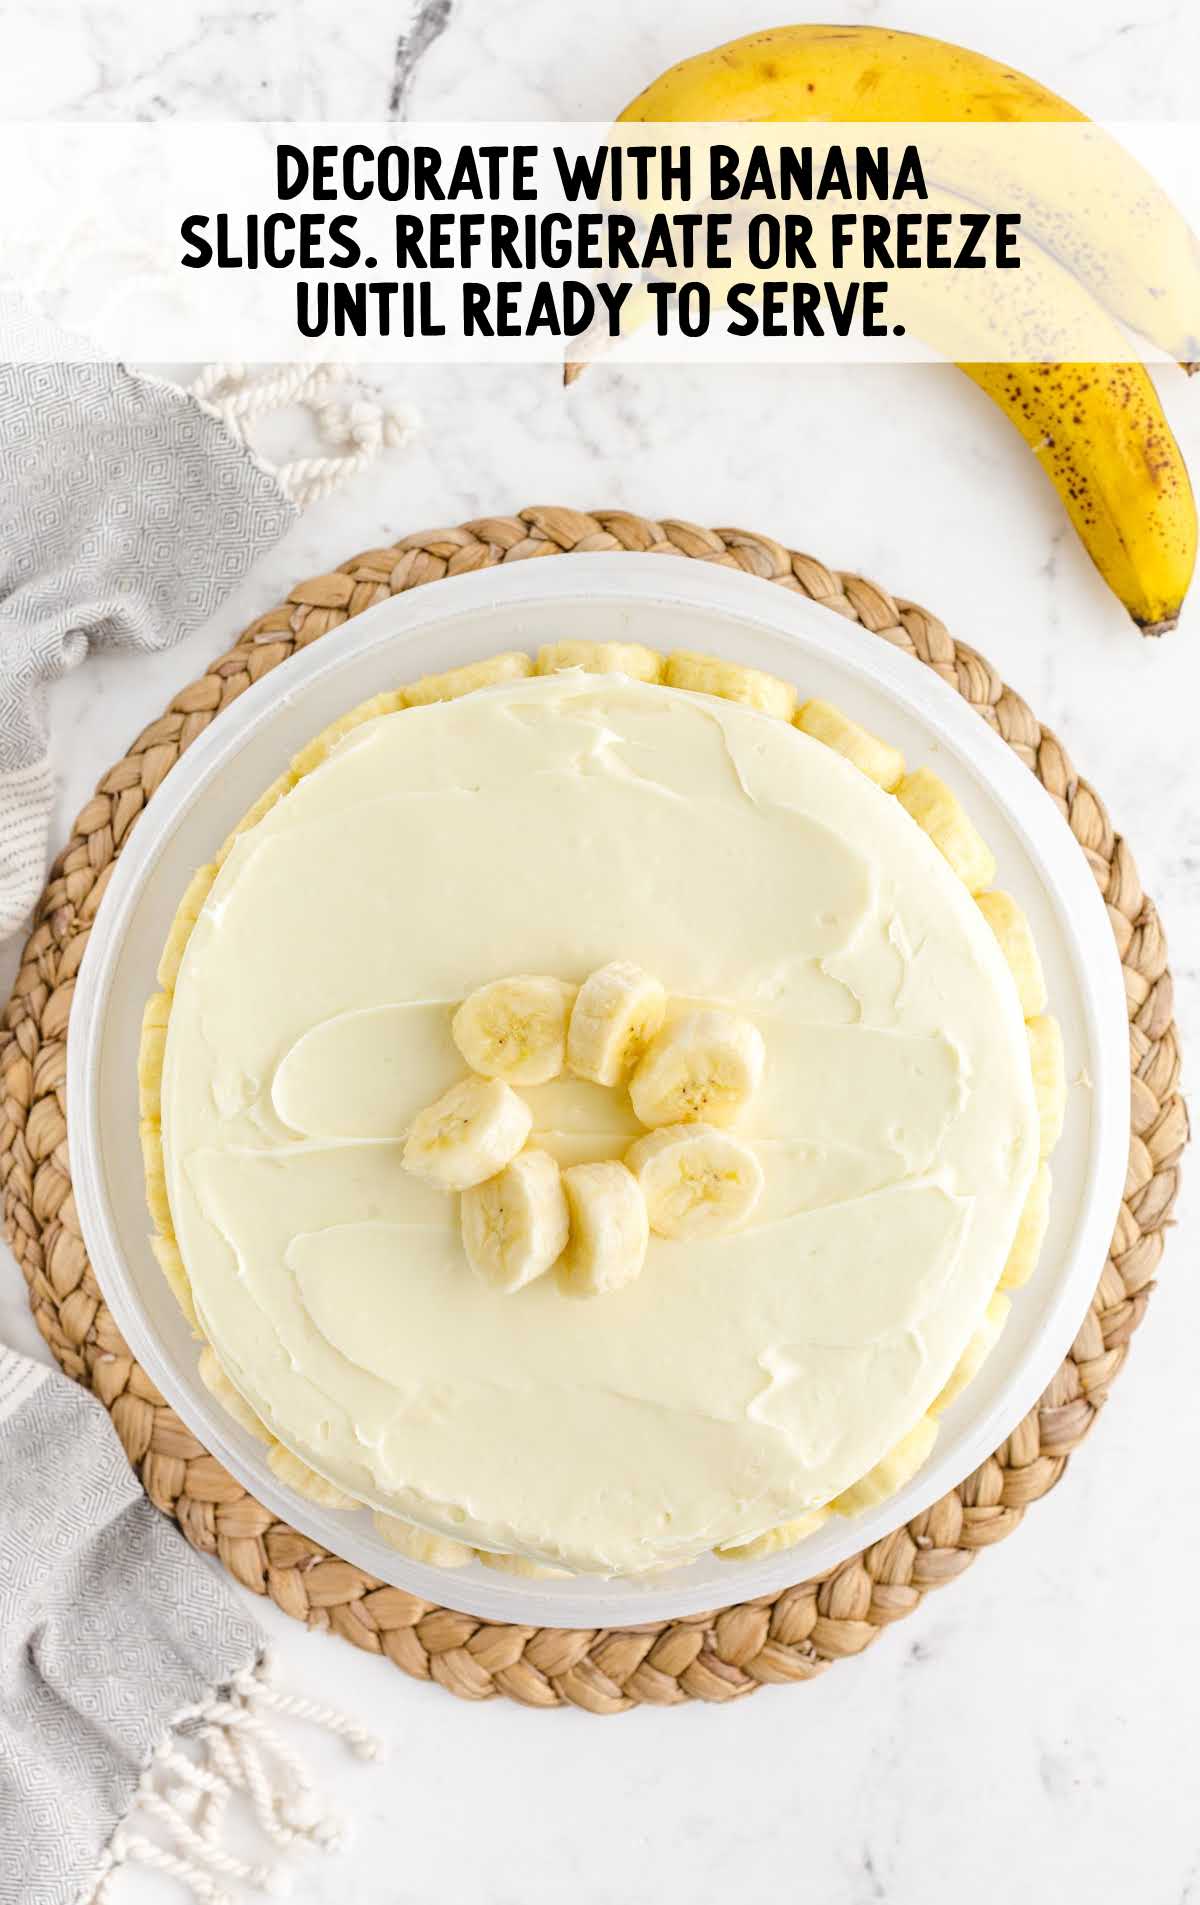 banana slices placed on top of the cake on a cake stand